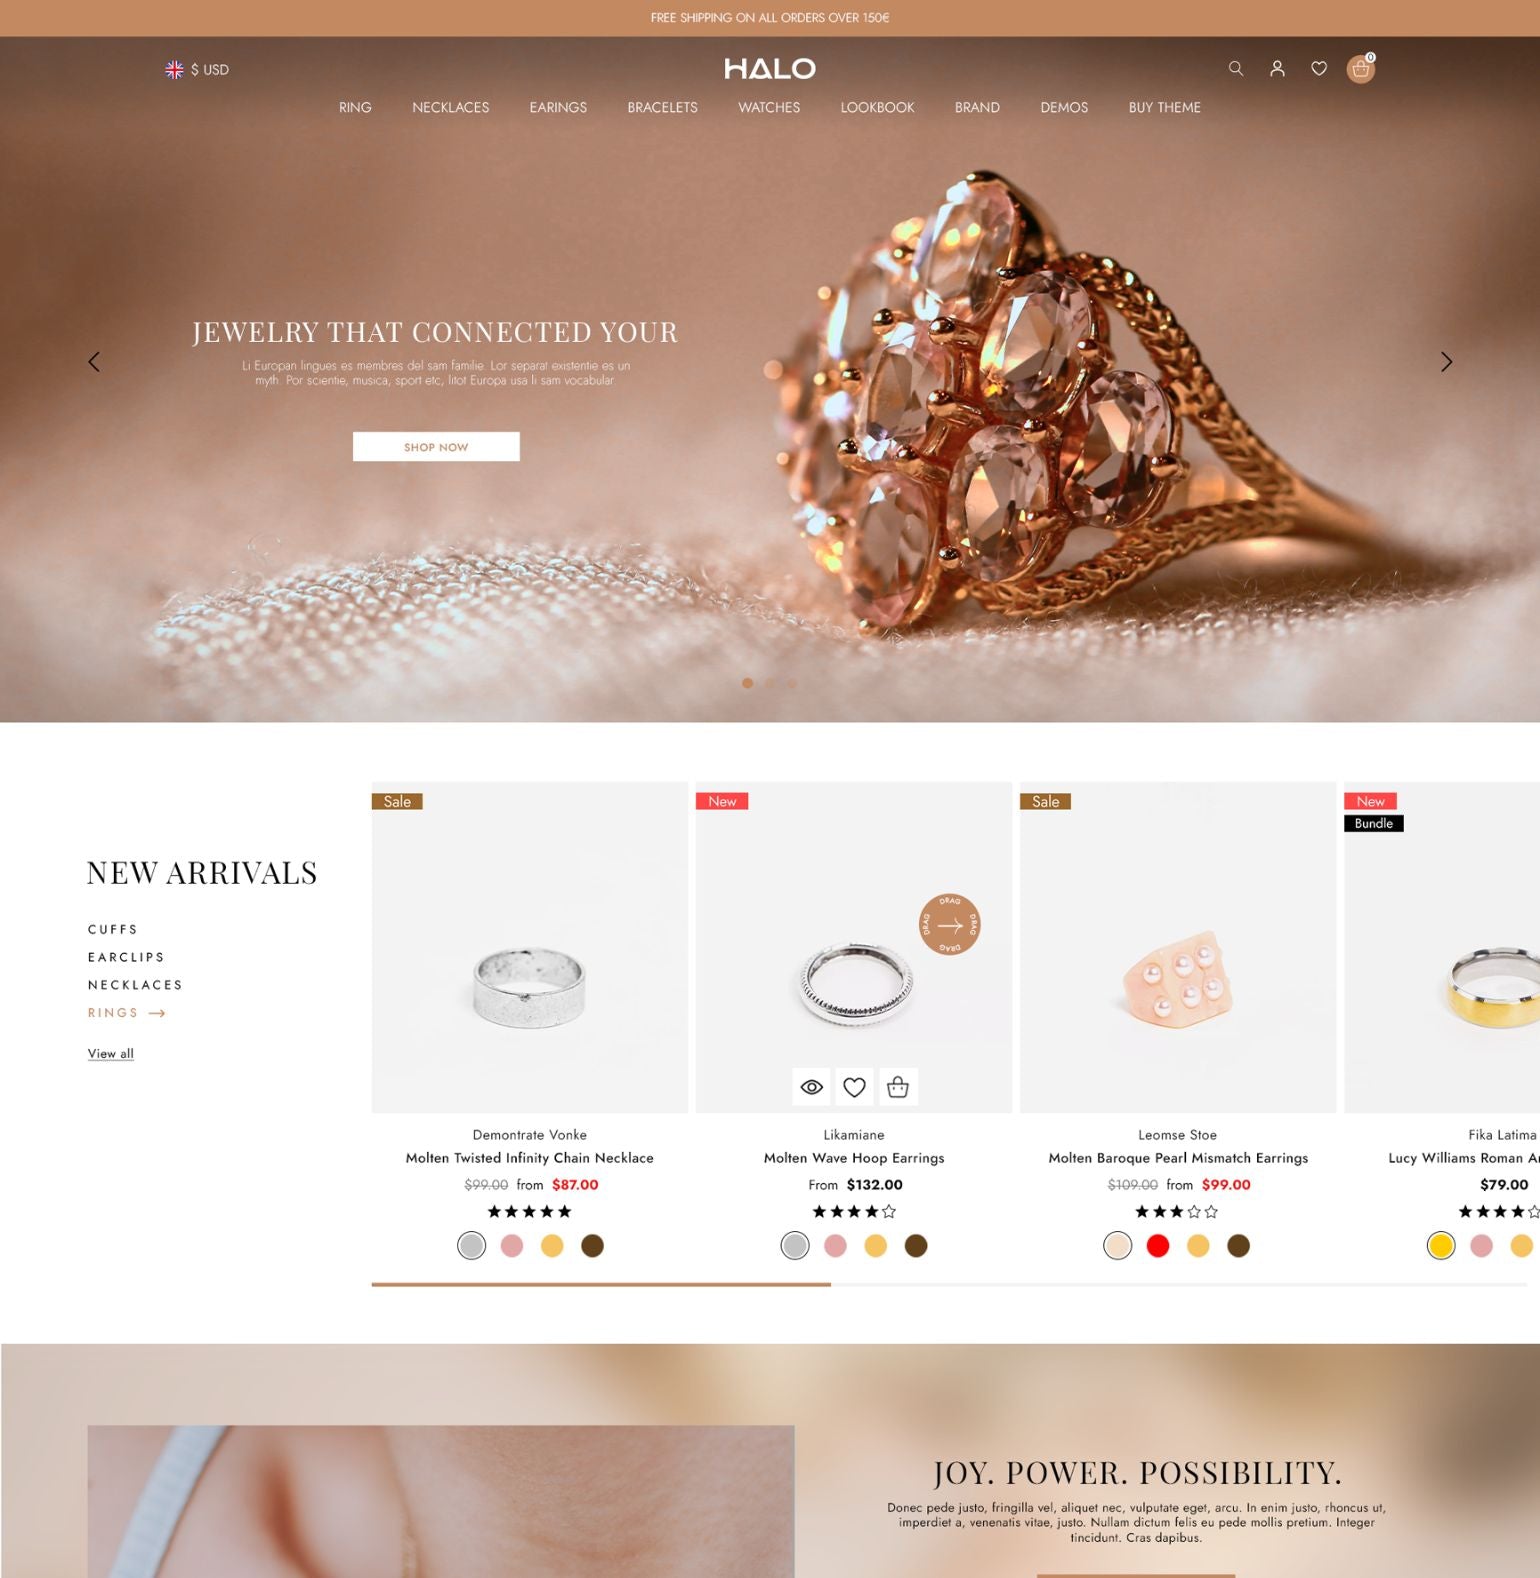 Halo Theme - Jewelry & Accessories Ecommerce Website Template